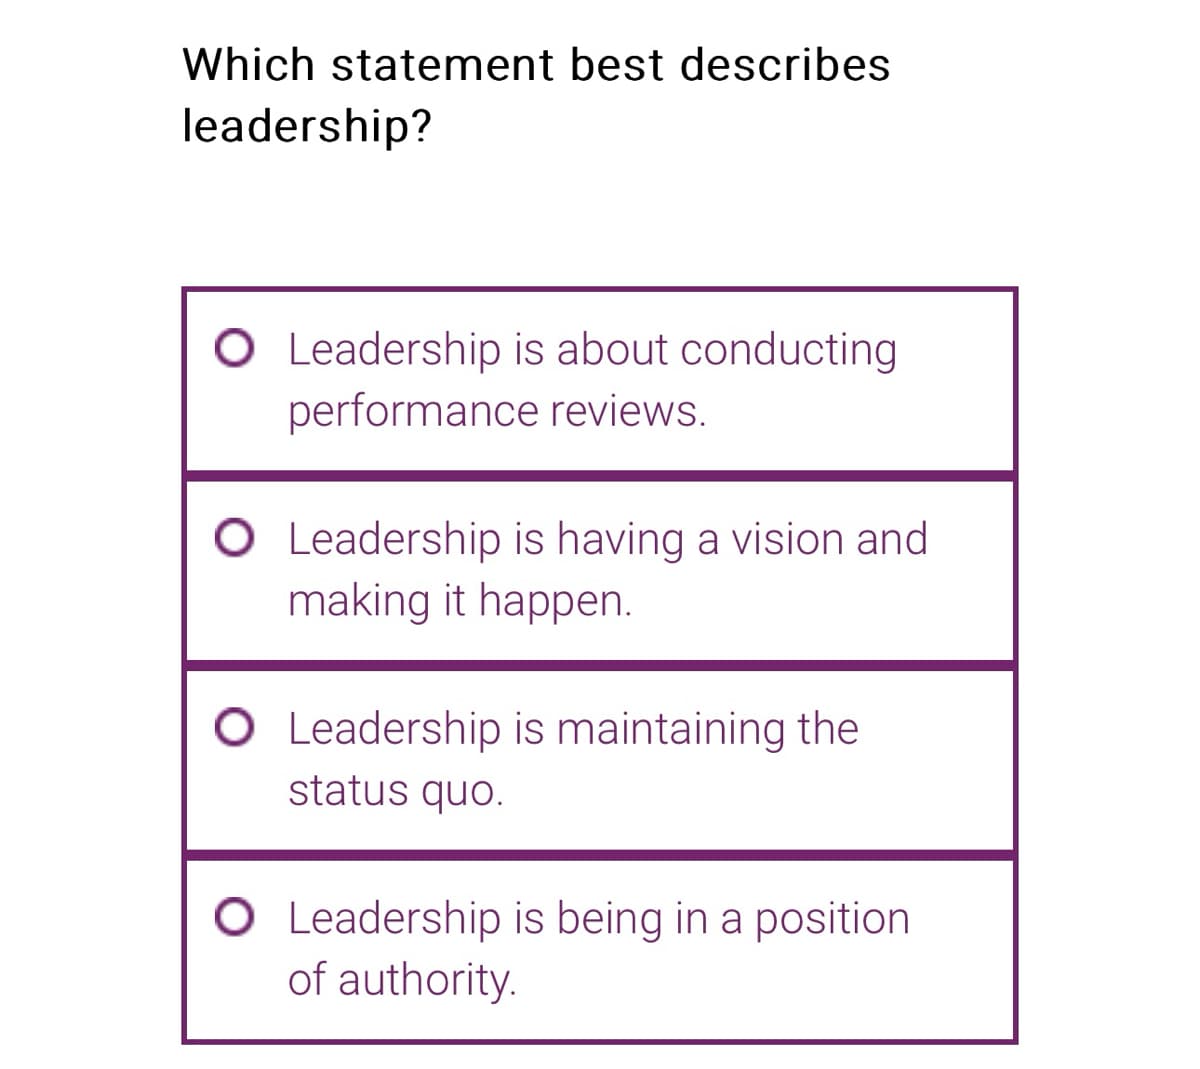 Which statement best describes
leadership?
O Leadership is about conducting
performance reviews.
O Leadership is having a vision and
making it happen.
O Leadership is maintaining the
status quo.
O Leadership is being in a position
of authority.